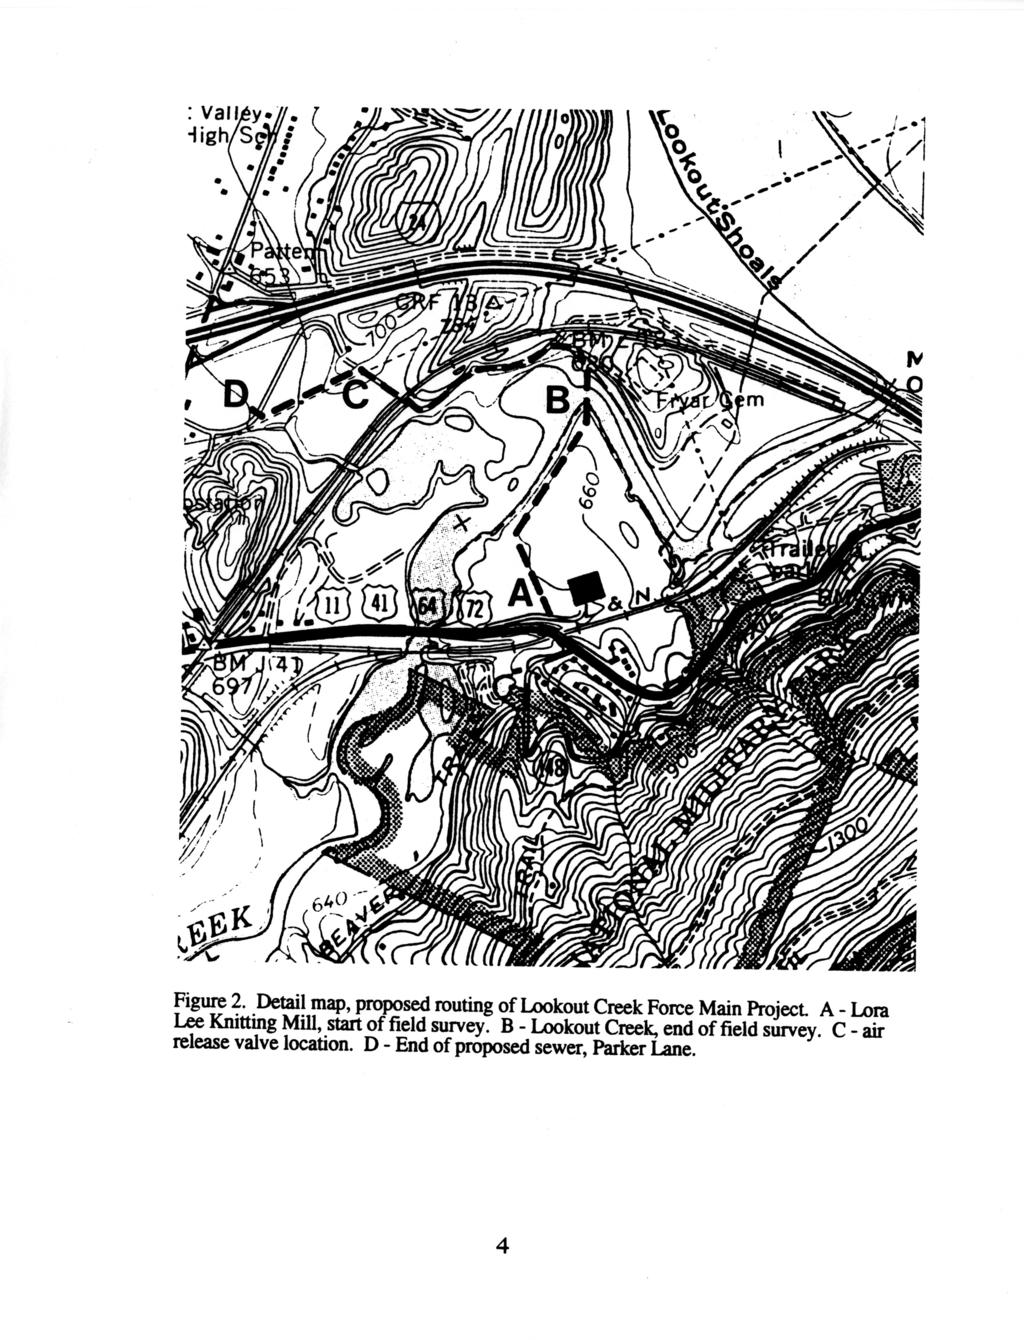 Figure 2. Detail map, proposed routing of Lookout Creek Force Main Project.